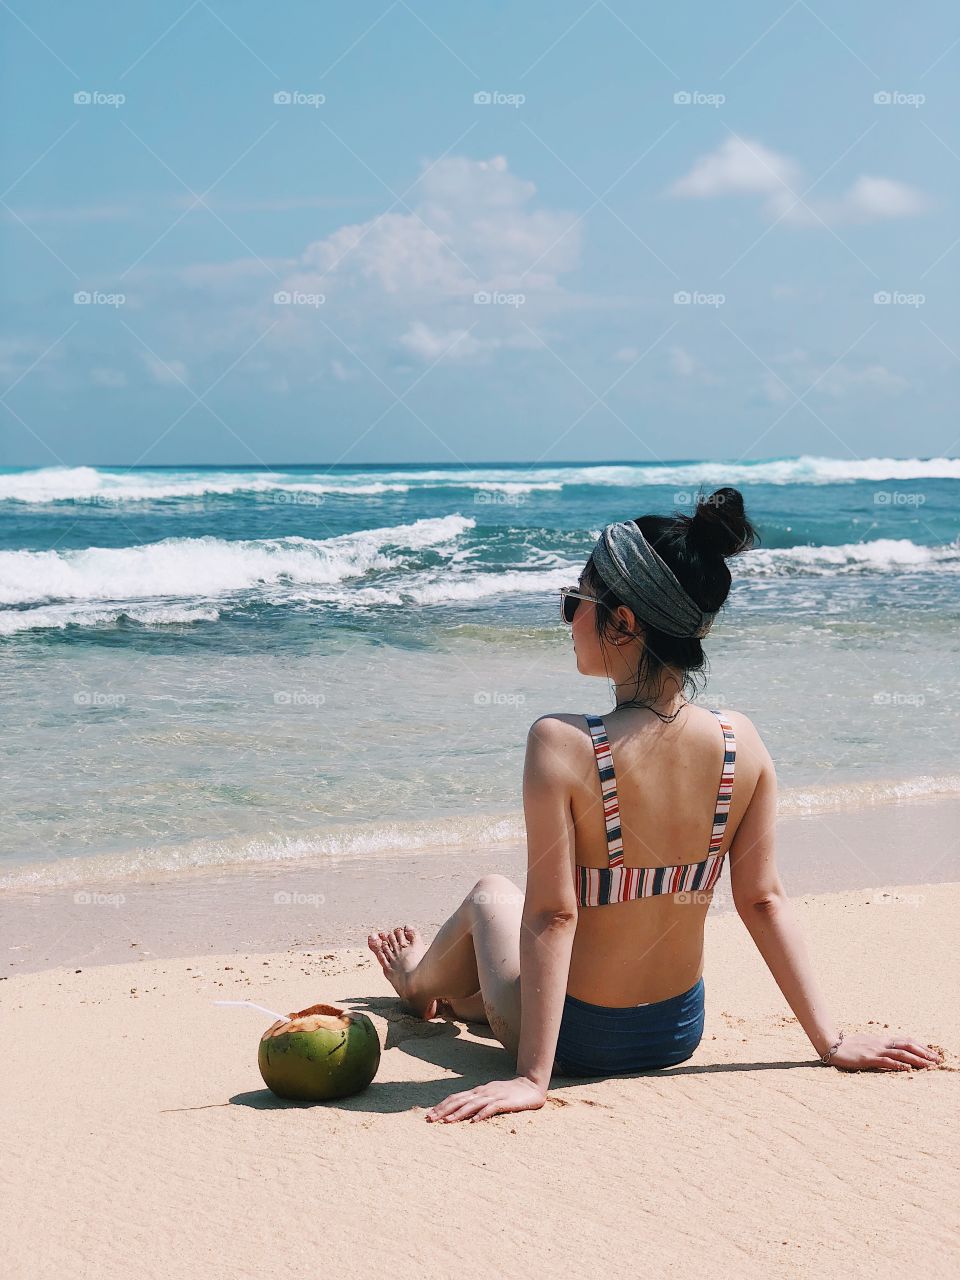 Chilling by the beach with stylish swimsuit and a coconut